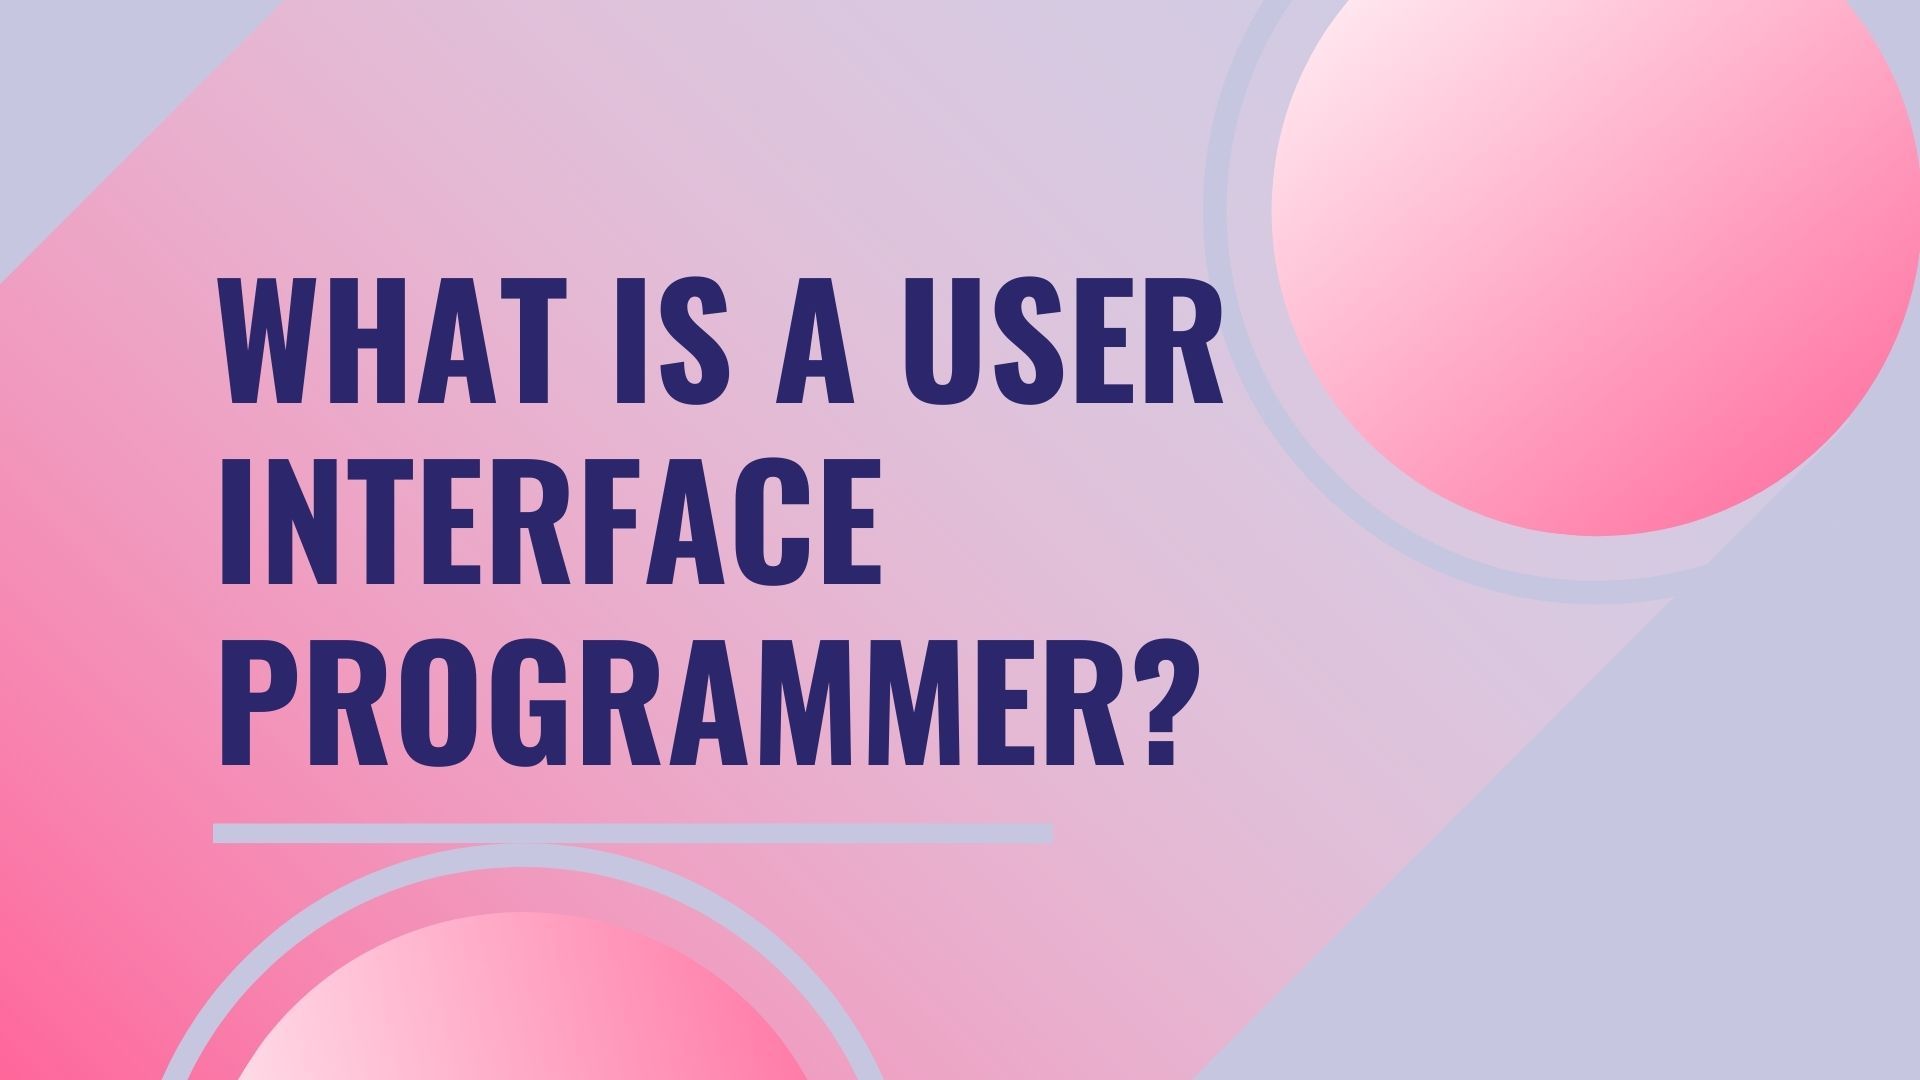 Everything you need to know about a user interface programmer